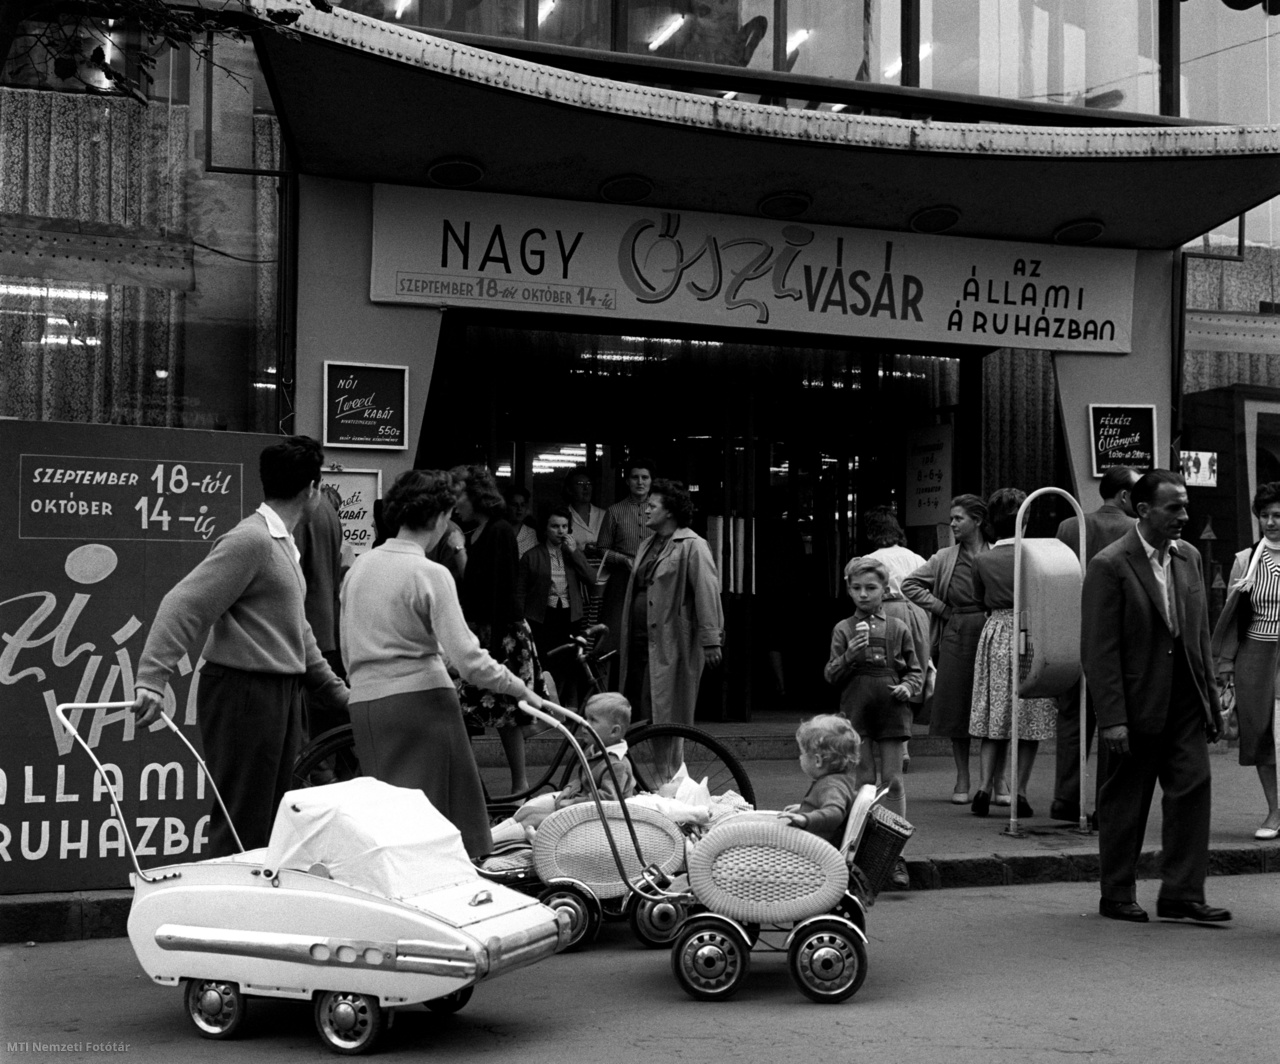 Győr, September 27, 1961 During the fall exhibition, shopkeepers and visitors push a stroller in front of the Győr State Department.  Győr is the economic and cultural center of northern Transnistria.  Its thriving industry, commerce and cultural amenities are worthy of the city's thousands of years of history as the seat of an important district of the country.